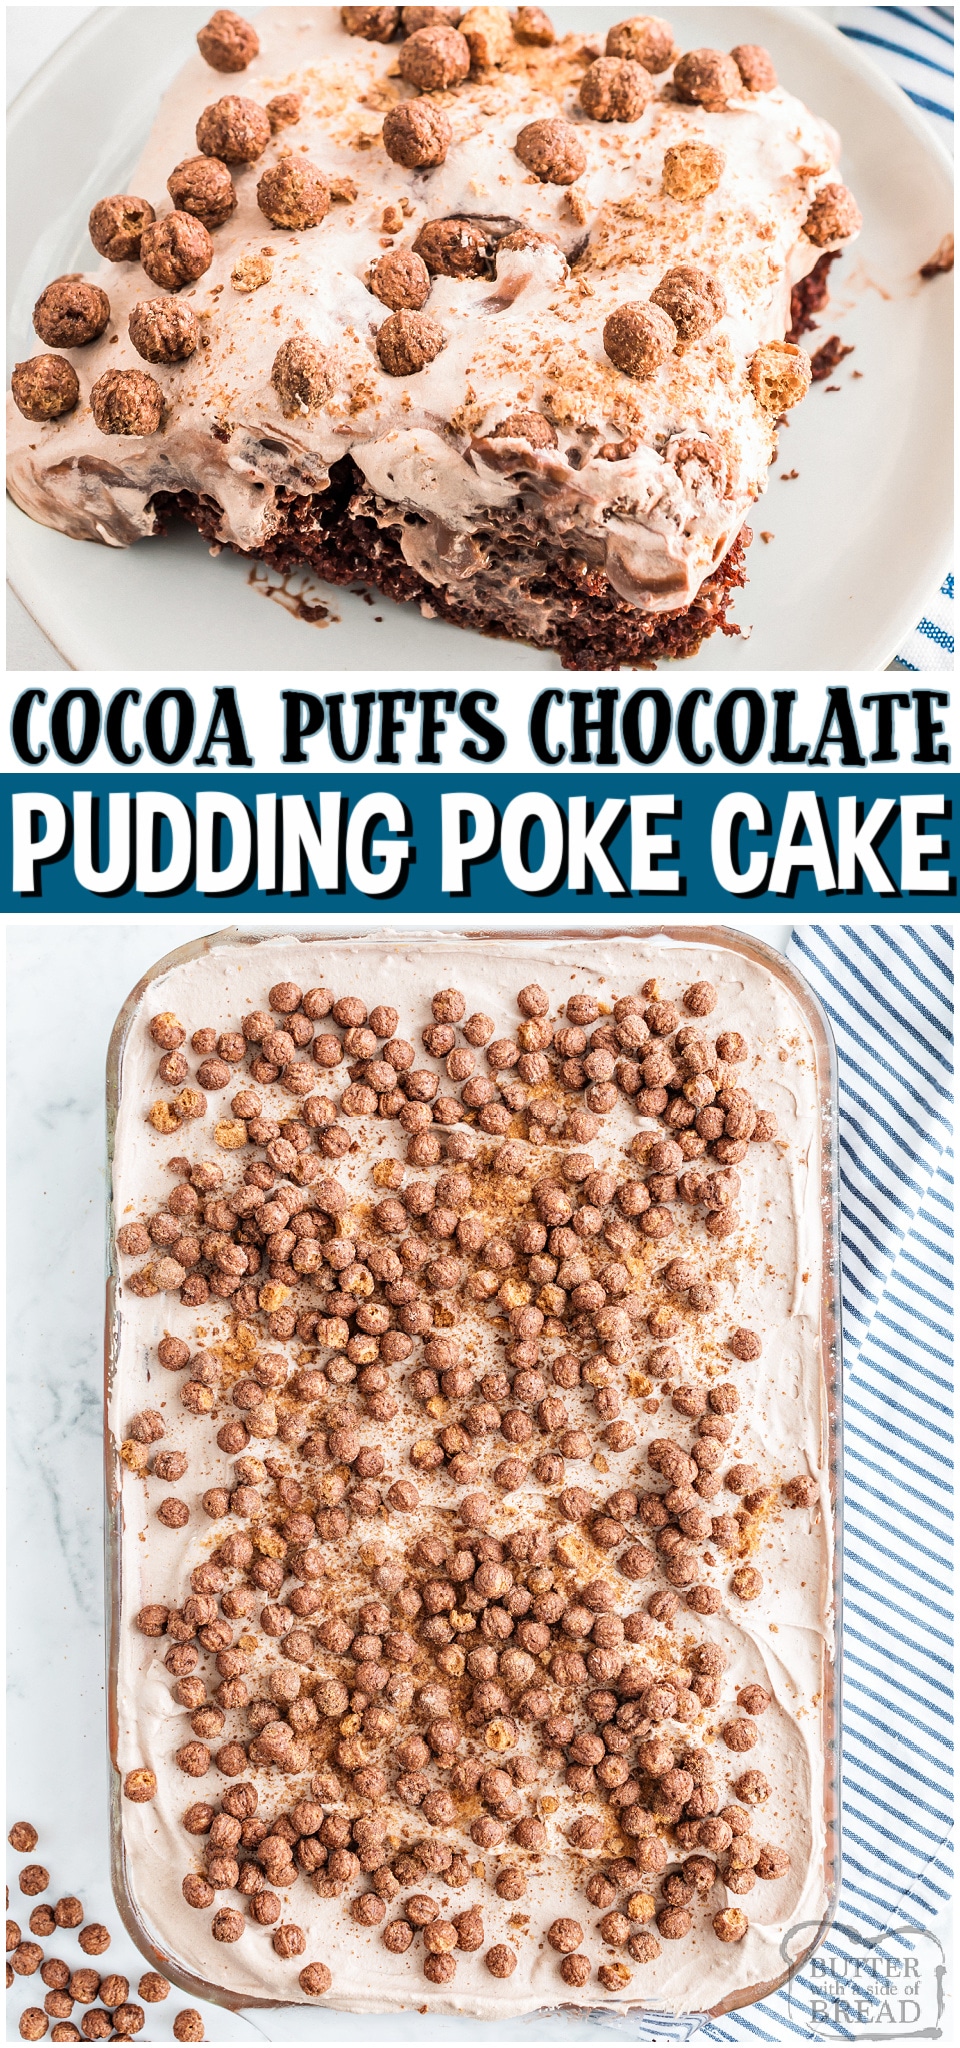 Cocoa Puffs Poke Cake made with the chocolatey cereal from your childhood, Cocoa Puffs! Chocolate cake and chocolate pudding combine, all topped with whipped cream & Cocoa Puffs cereal!